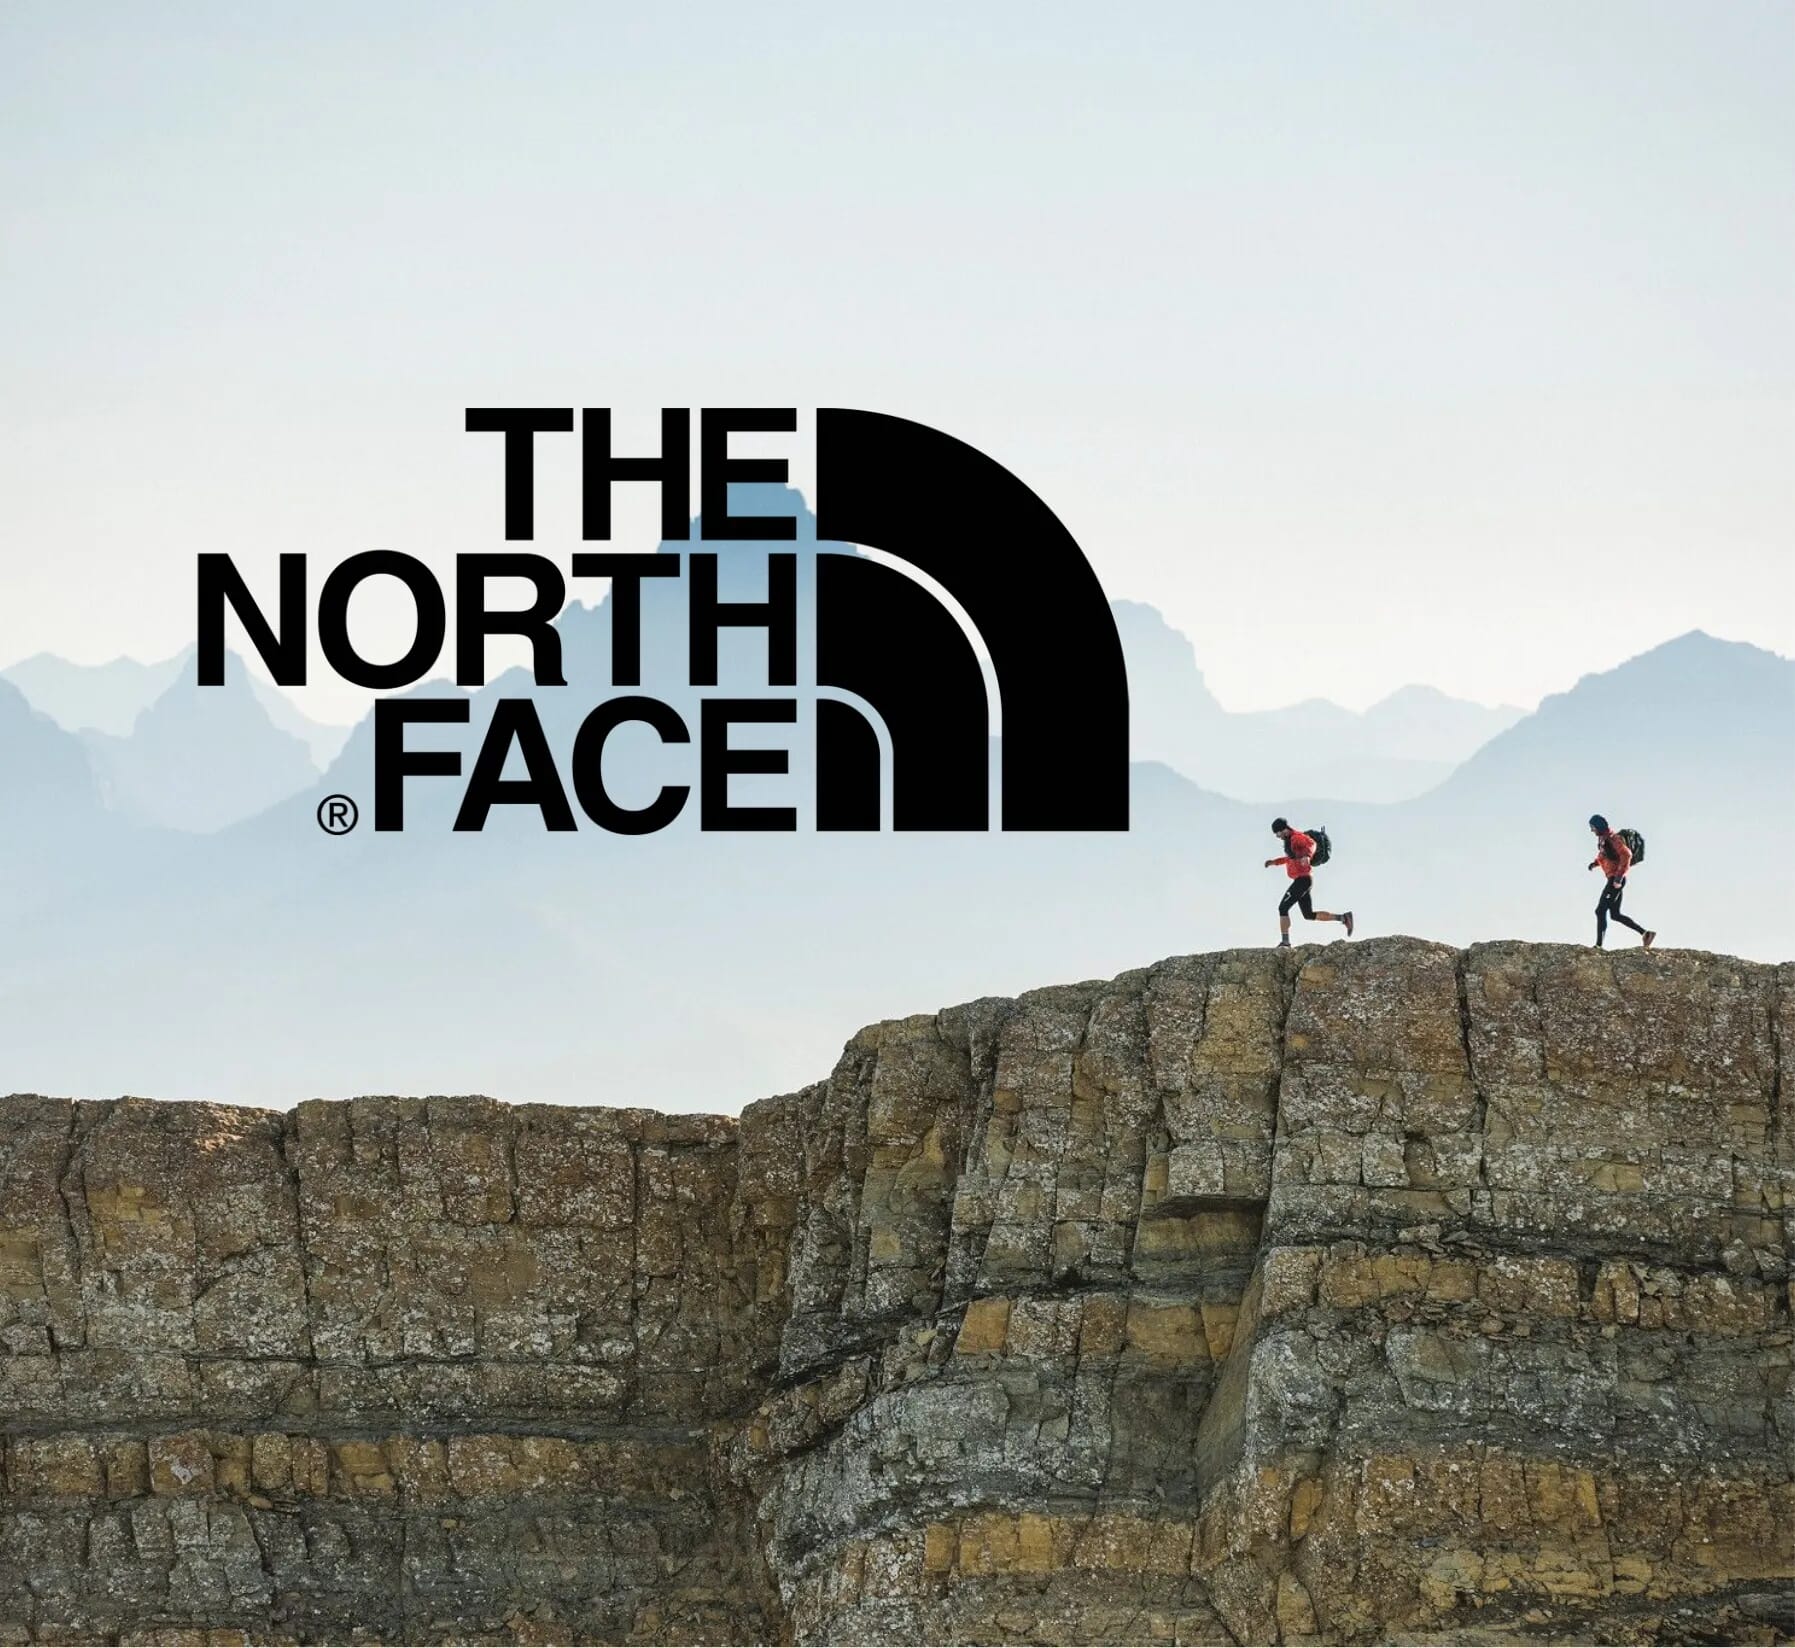 The Best North Face Promotional Products for Corporate Gifting